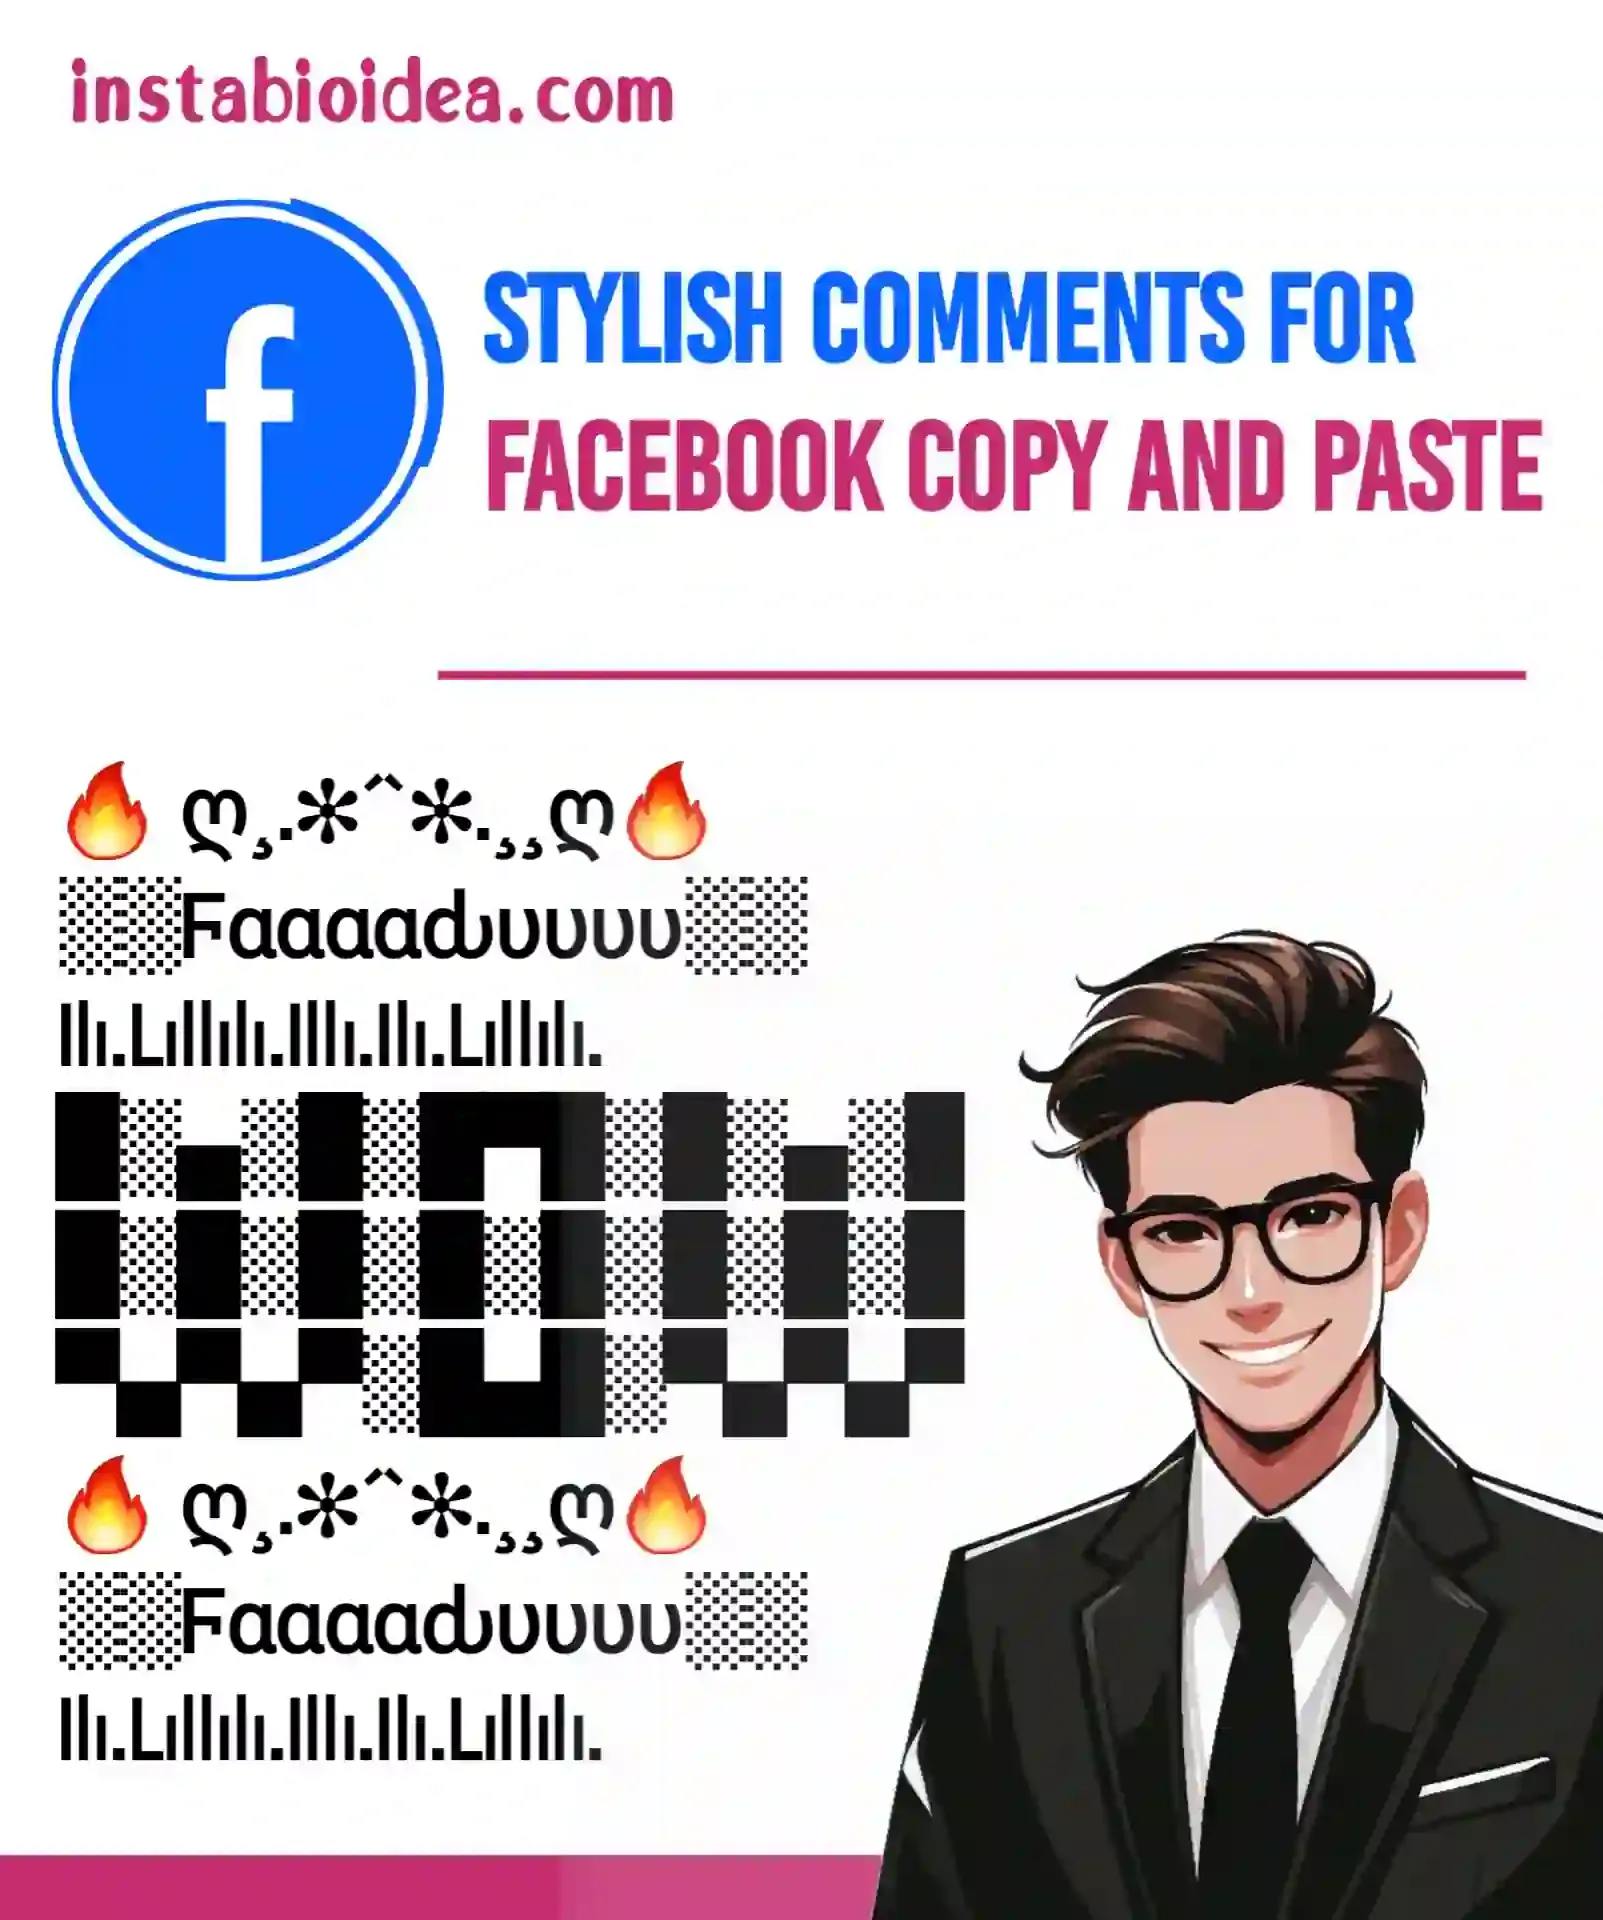 stylish comments for facebook copy and paste image